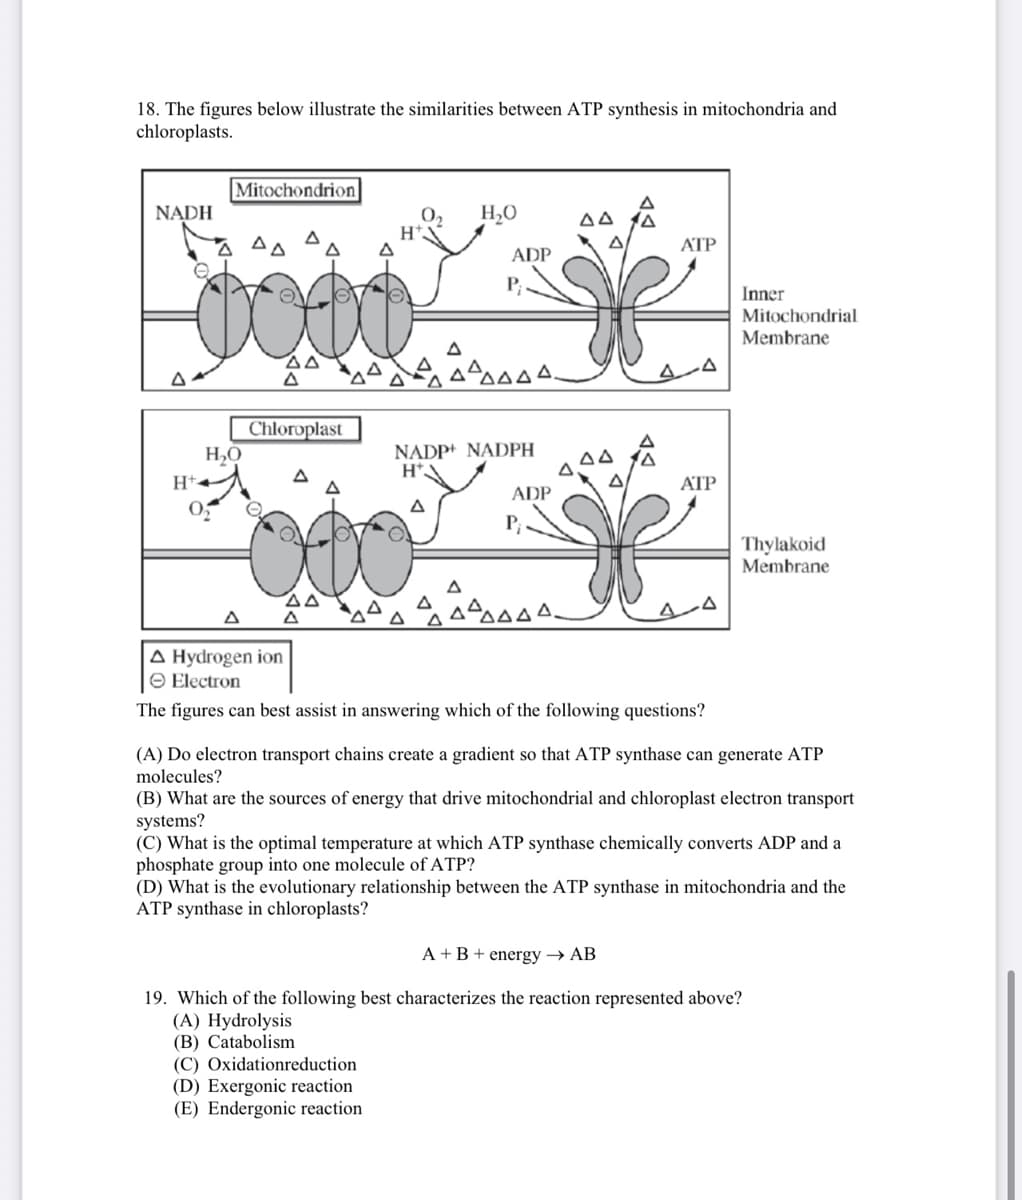 18. The figures below illustrate the similarities between ATP synthesis in mitochondria and
chloroplasts.
Mitochondrion
NADH
H,0
Δ
H*.
ATP
ADP
P;
Inner
Mitochondrial
Membrane
Chloroplast
H,O
NADP+ NADPH
H*
H+-
ATP
ADP
Thylakoid
Membrane
A
A Hydrogen ion
O Electron
The figures can best assist in answering which of the following questions?
(A) Do electron transport chains create a gradient so that ATP synthase can generate ATP
molecules?
(B) What are the sources of energy that drive mitochondrial and chloroplast electron transport
systems?
(C) What is the optimal temperature at which ATP synthase chemically converts ADP and a
phosphate group into one molecule of ATP?
(D) What is the evolutionary relationship between the ATP synthase in mitochondria and the
ATP synthase in chloroplasts?
A +B + energy → AB
19. Which of the following best characterizes the reaction represented above?
(A) Hydrolysis
(B) Catabolism
(C) Oxidationreduction
(D) Exergonic reaction
(E) Endergonic reaction
